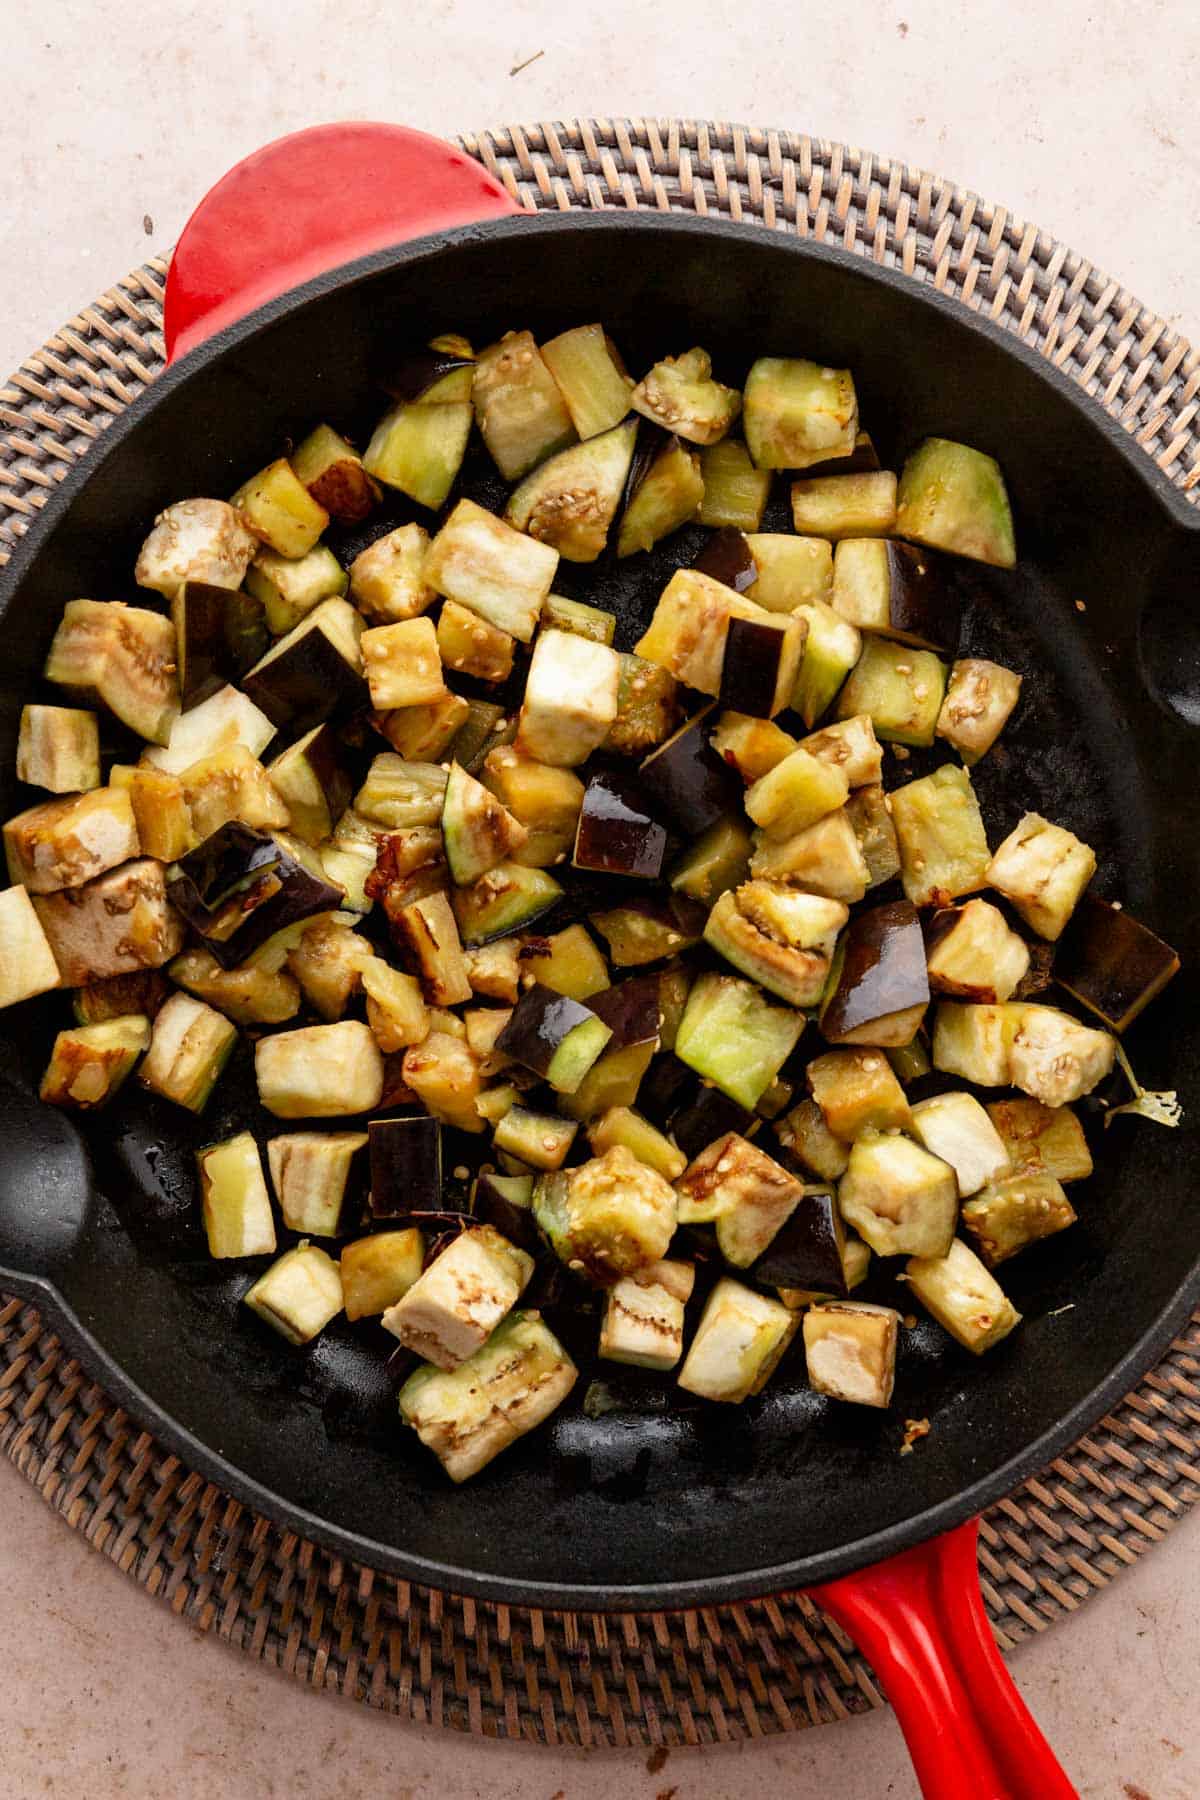 sauteing eggplant cubes in skillet.